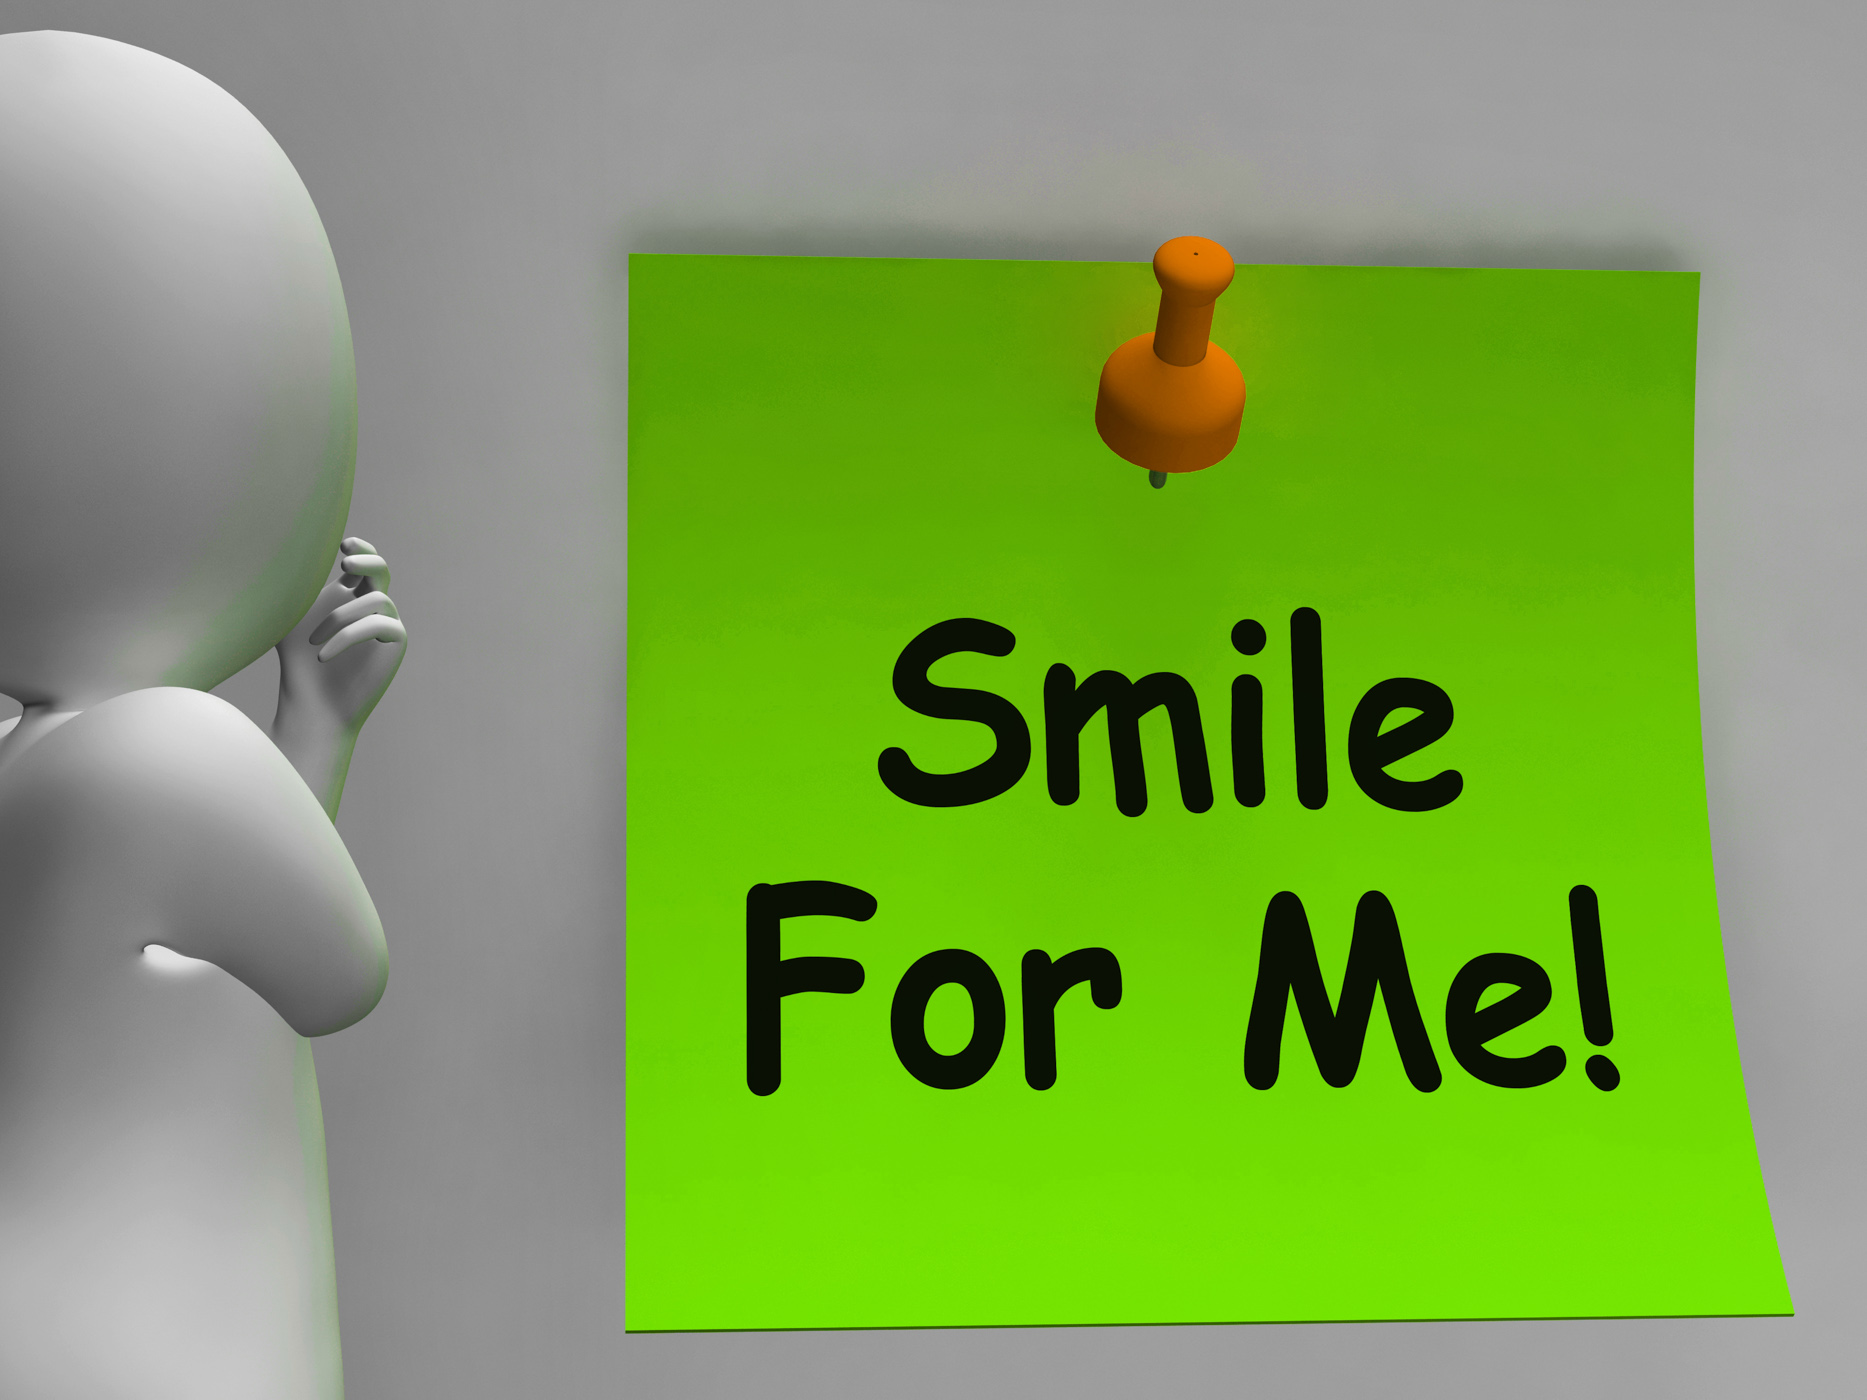 Smile For Me Note Means Be Happy Cheerful, Behappy, Character, Cheerful, Friendly, HQ Photo